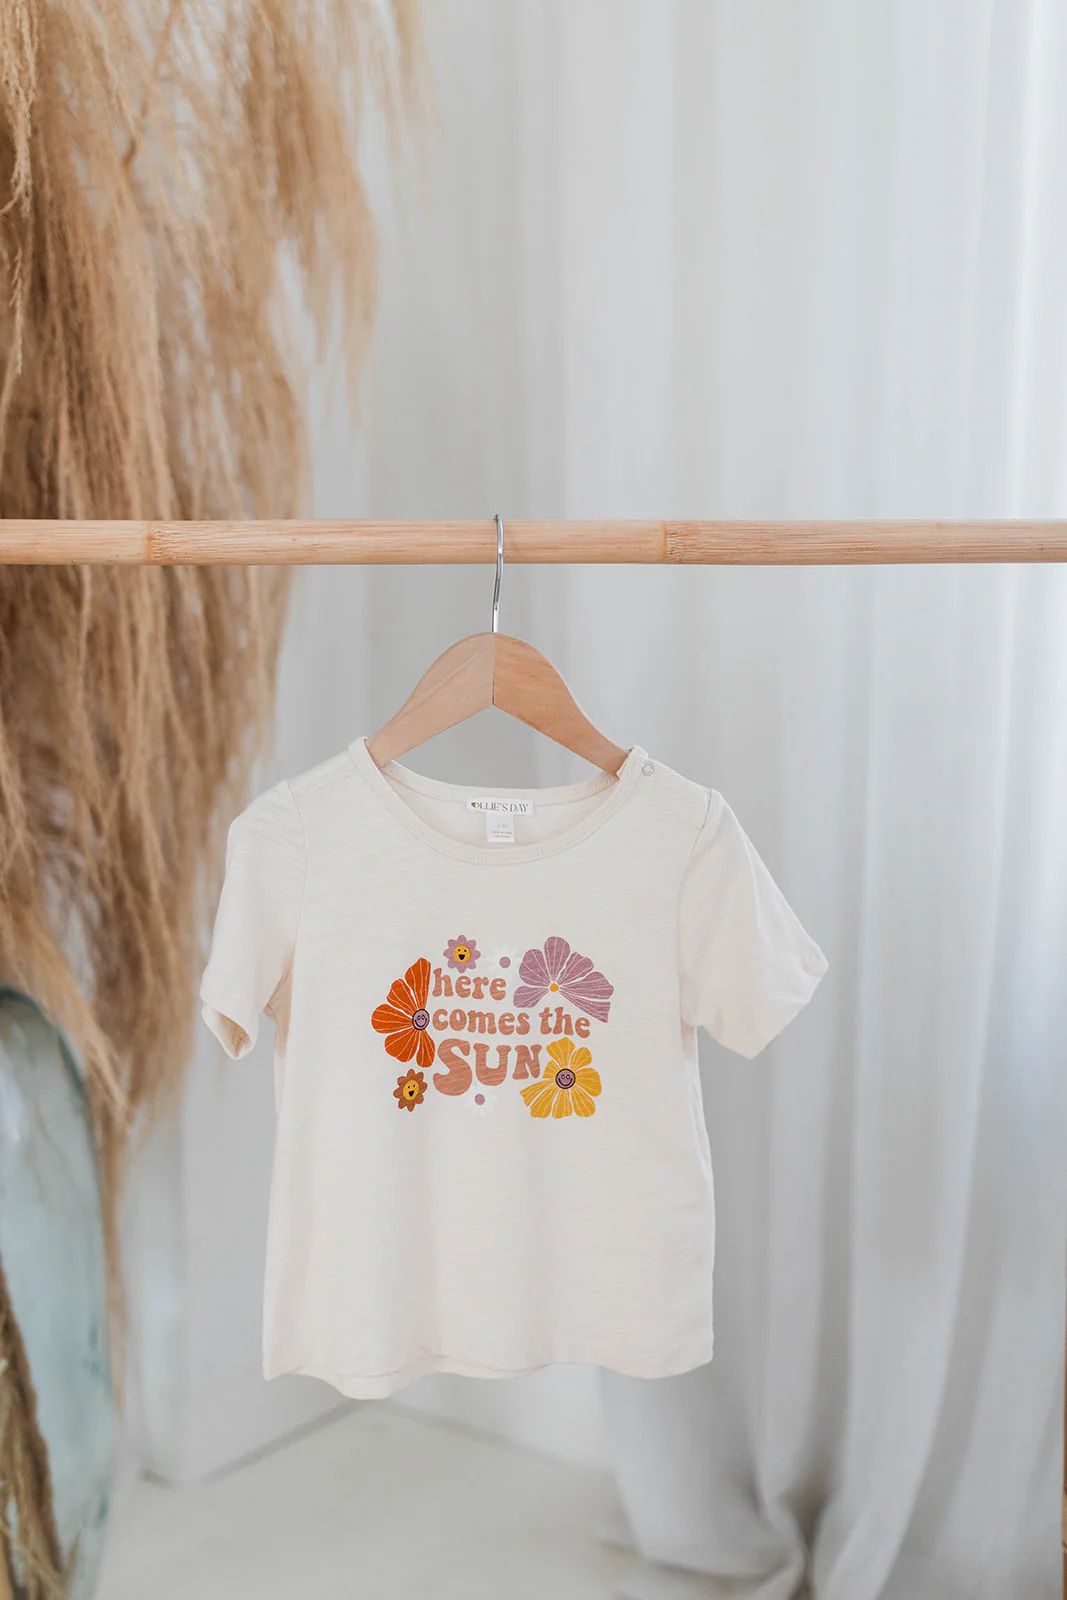 Here Comes the Sun Tee | Graphic T-Shirts for Kids, Toddlers, and Babies | Ollie's Day